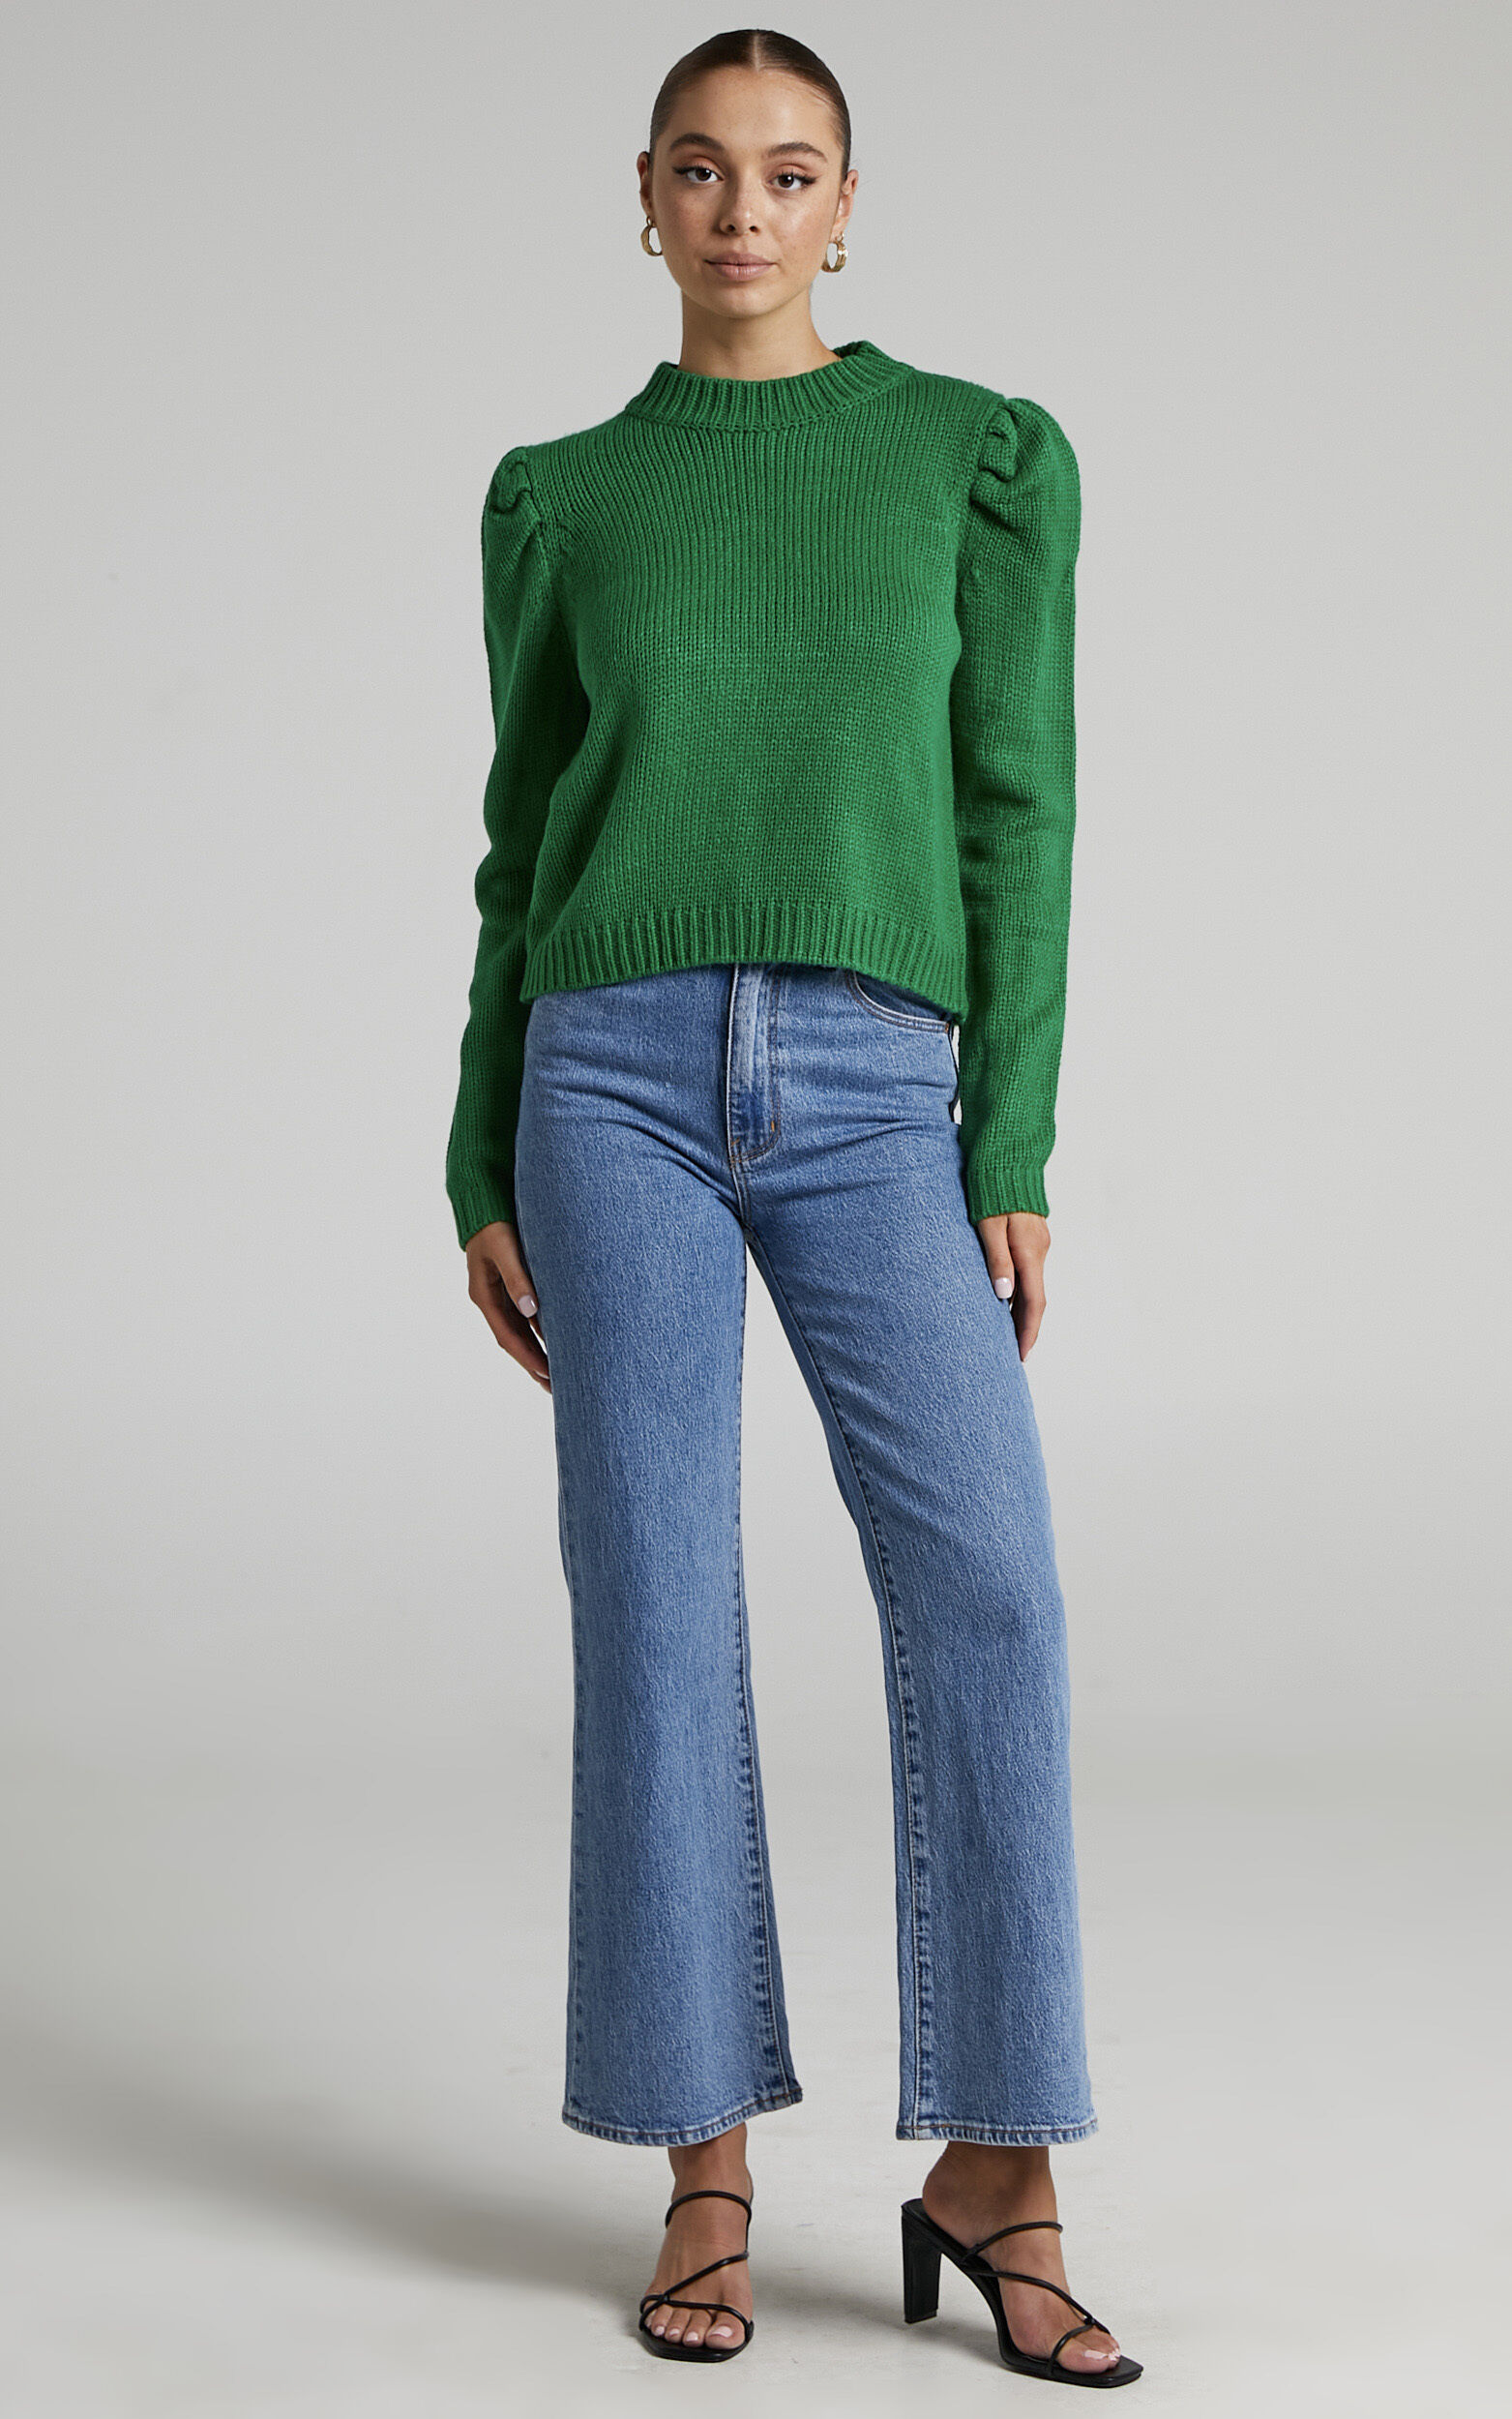 Kayrai Puff Sleeve Knit Jumper in Kelly Green - 04, GRN1, super-hi-res image number null